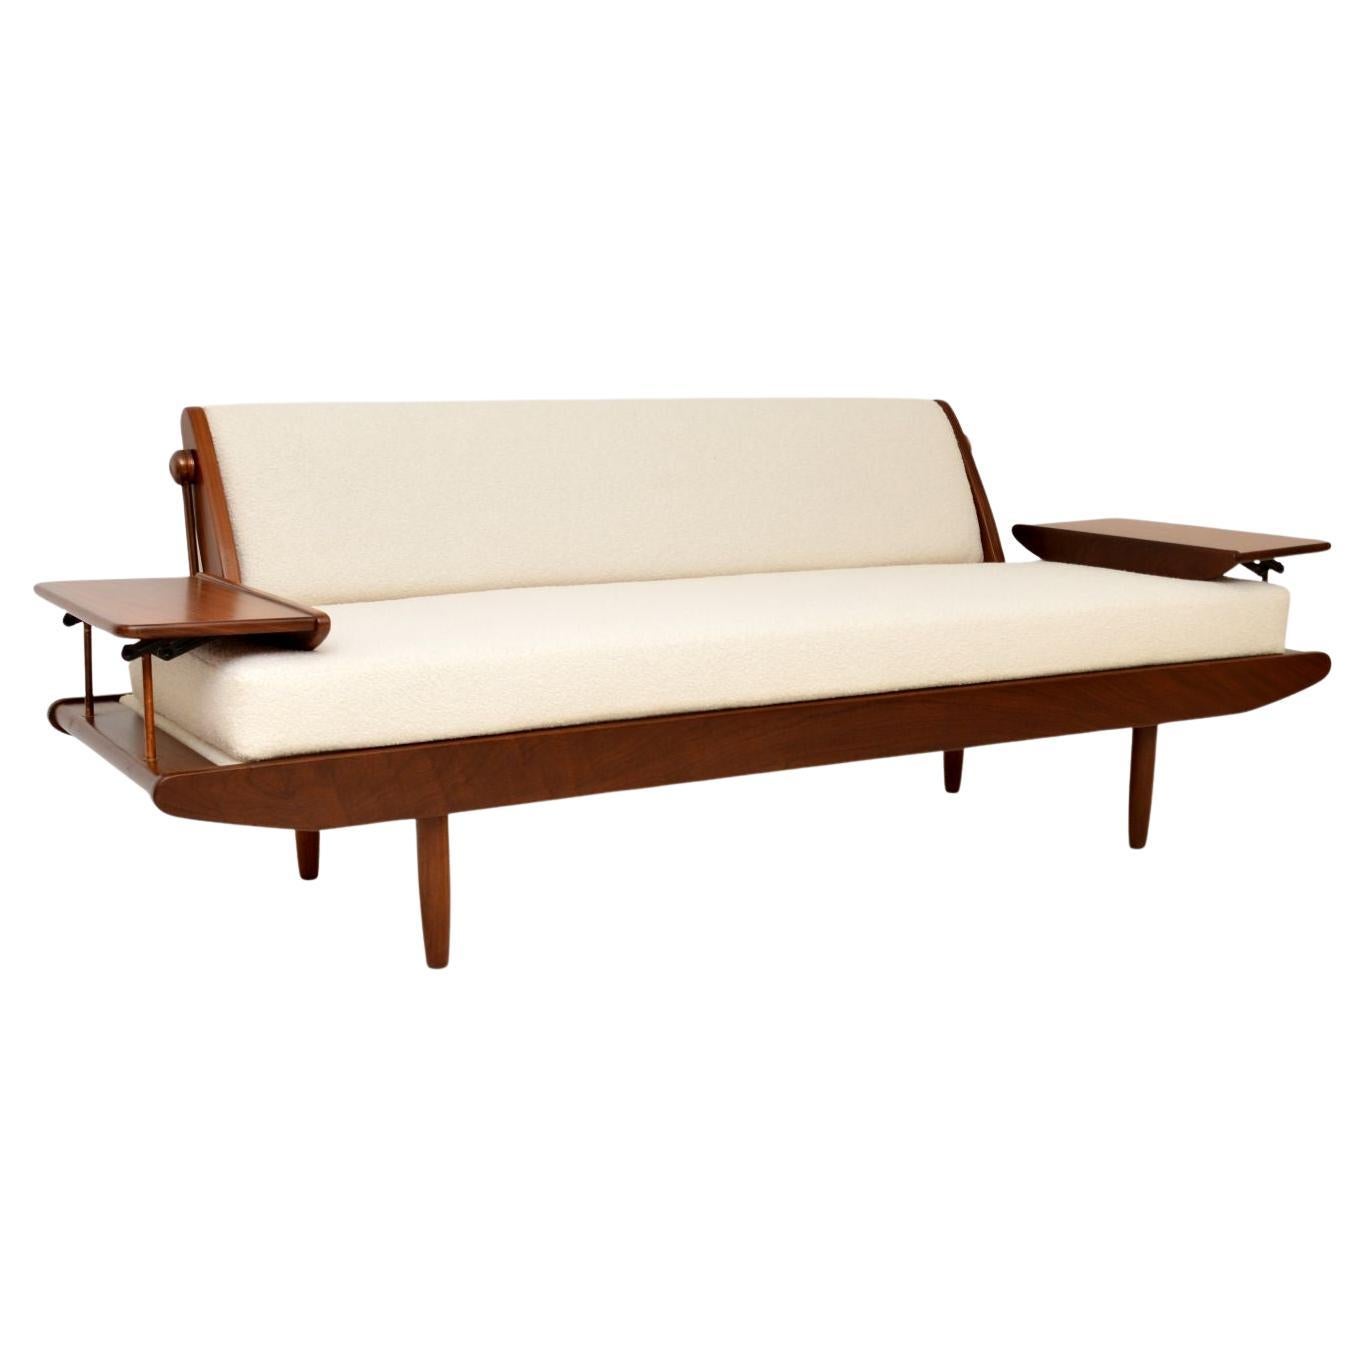 1960's Vintage Sofa Bed by Toothill For Sale